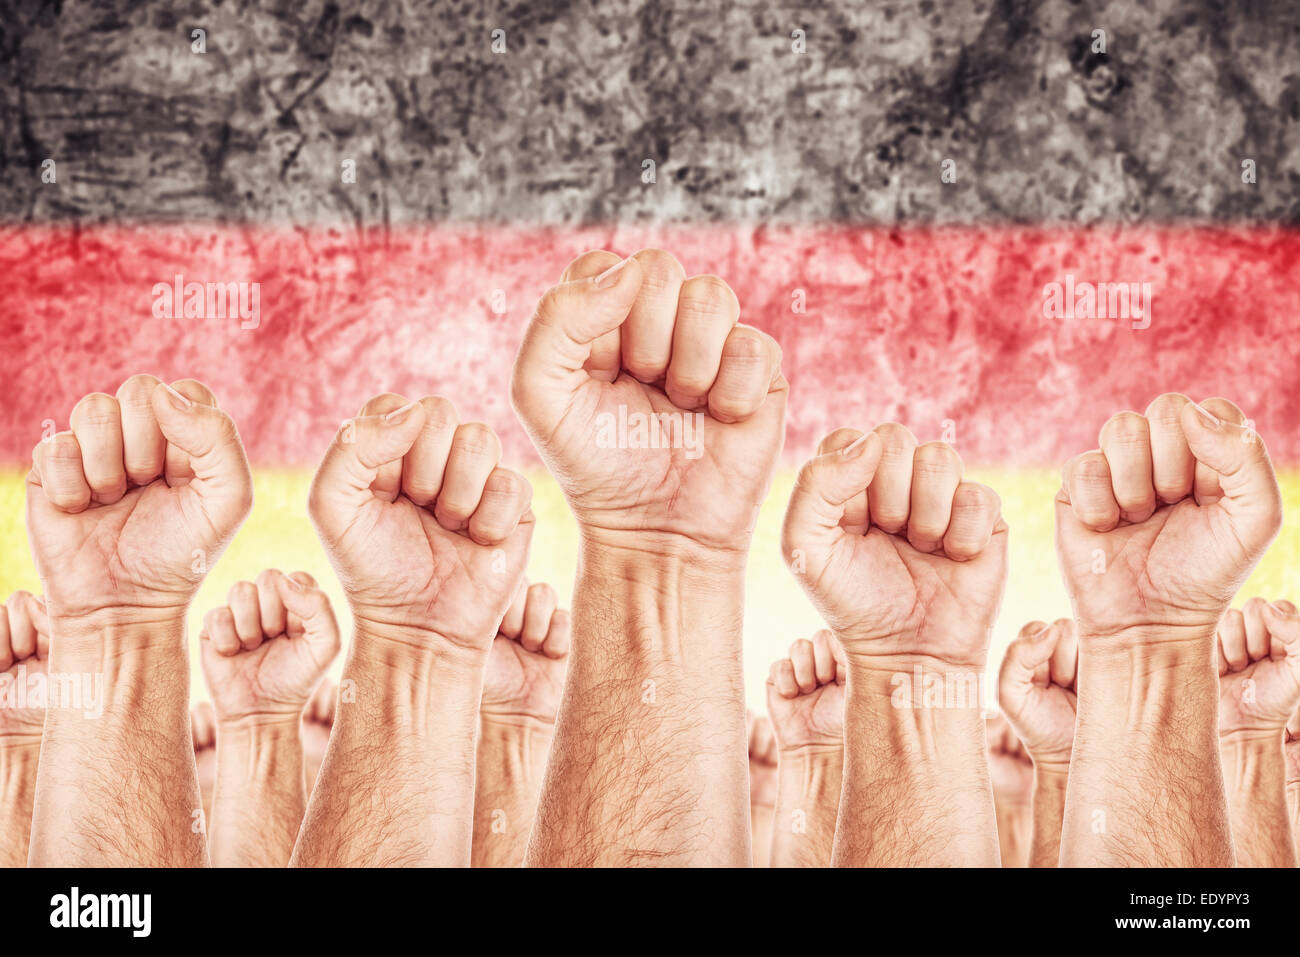 Germany Labor Movement Workers Union Strike Concept With Male Fists